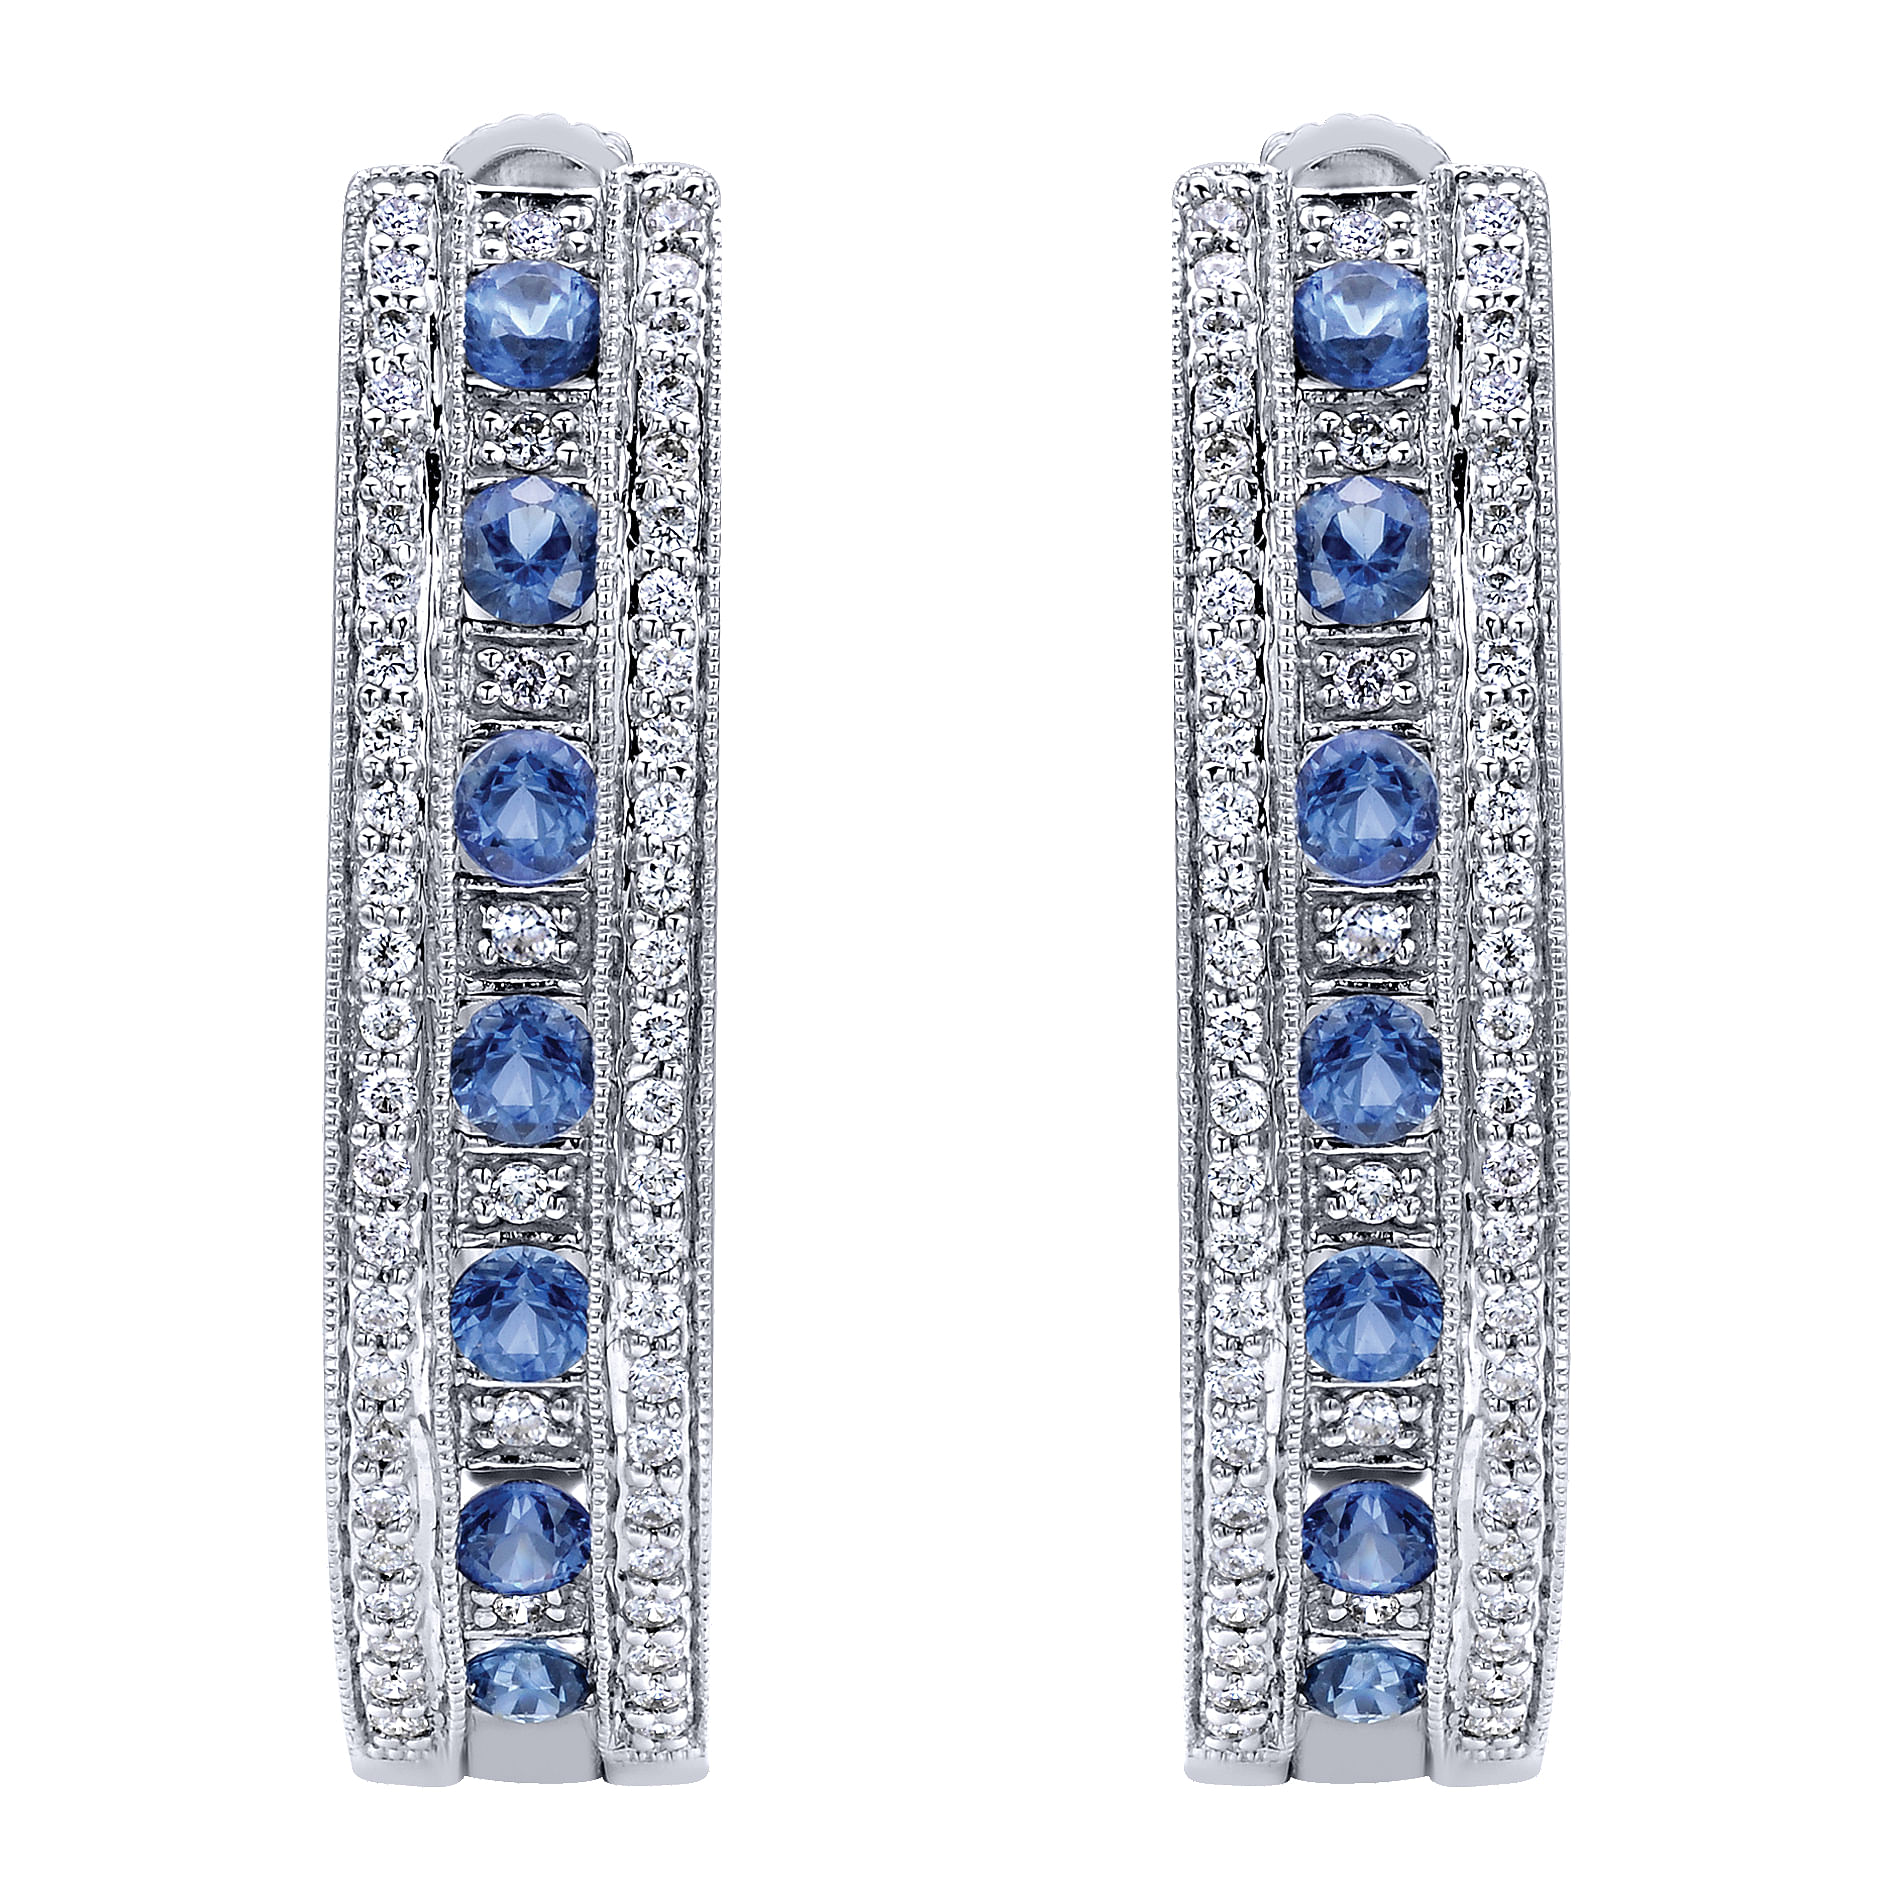 14K White Gold Prong Set/Channel 30mm Round Classic Diamond & Sapphire Hoop Earrings